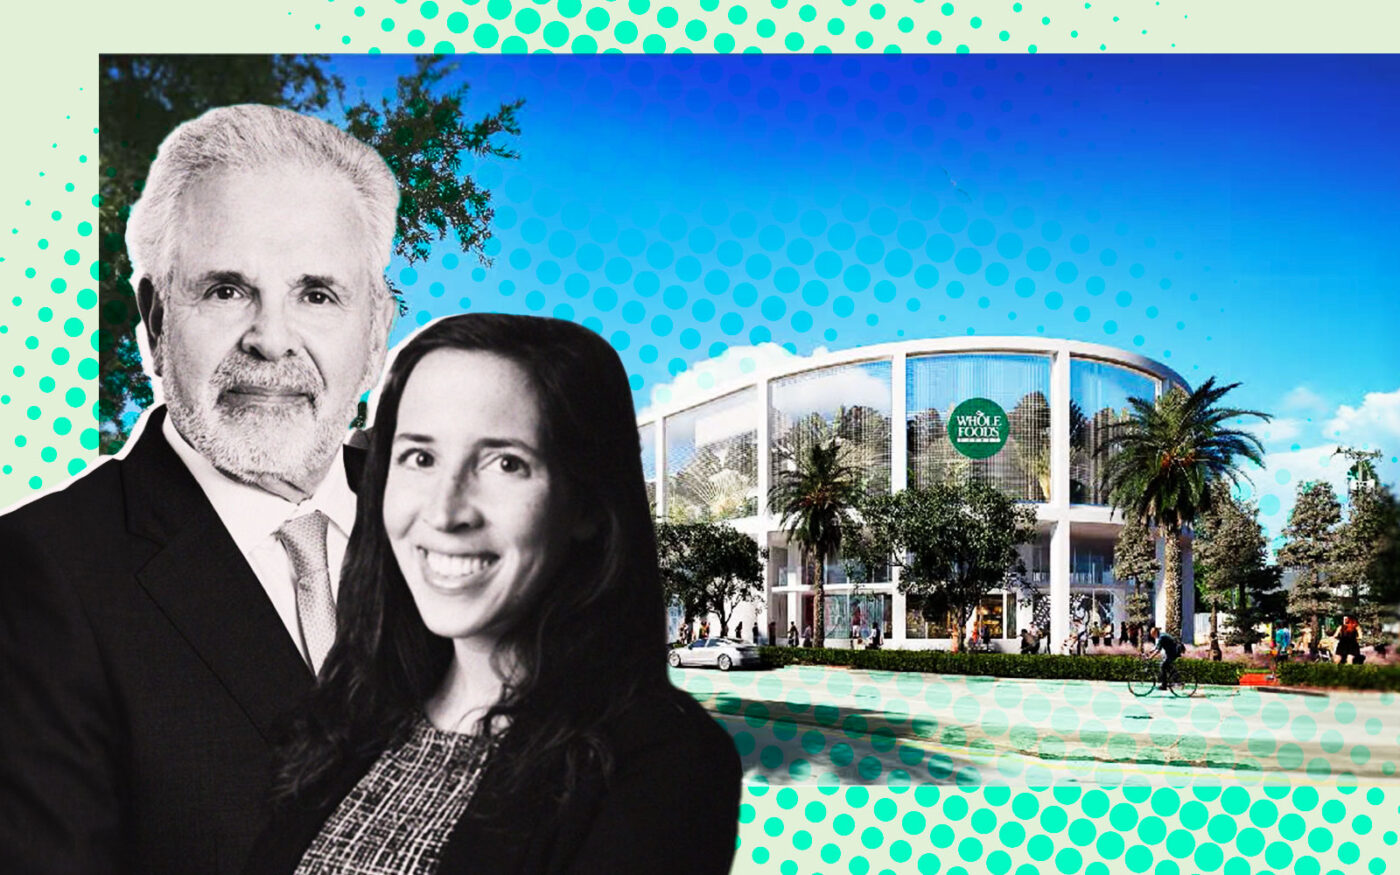 Crescent Heights $40M Whole Foods Project In Miami Beach OKed